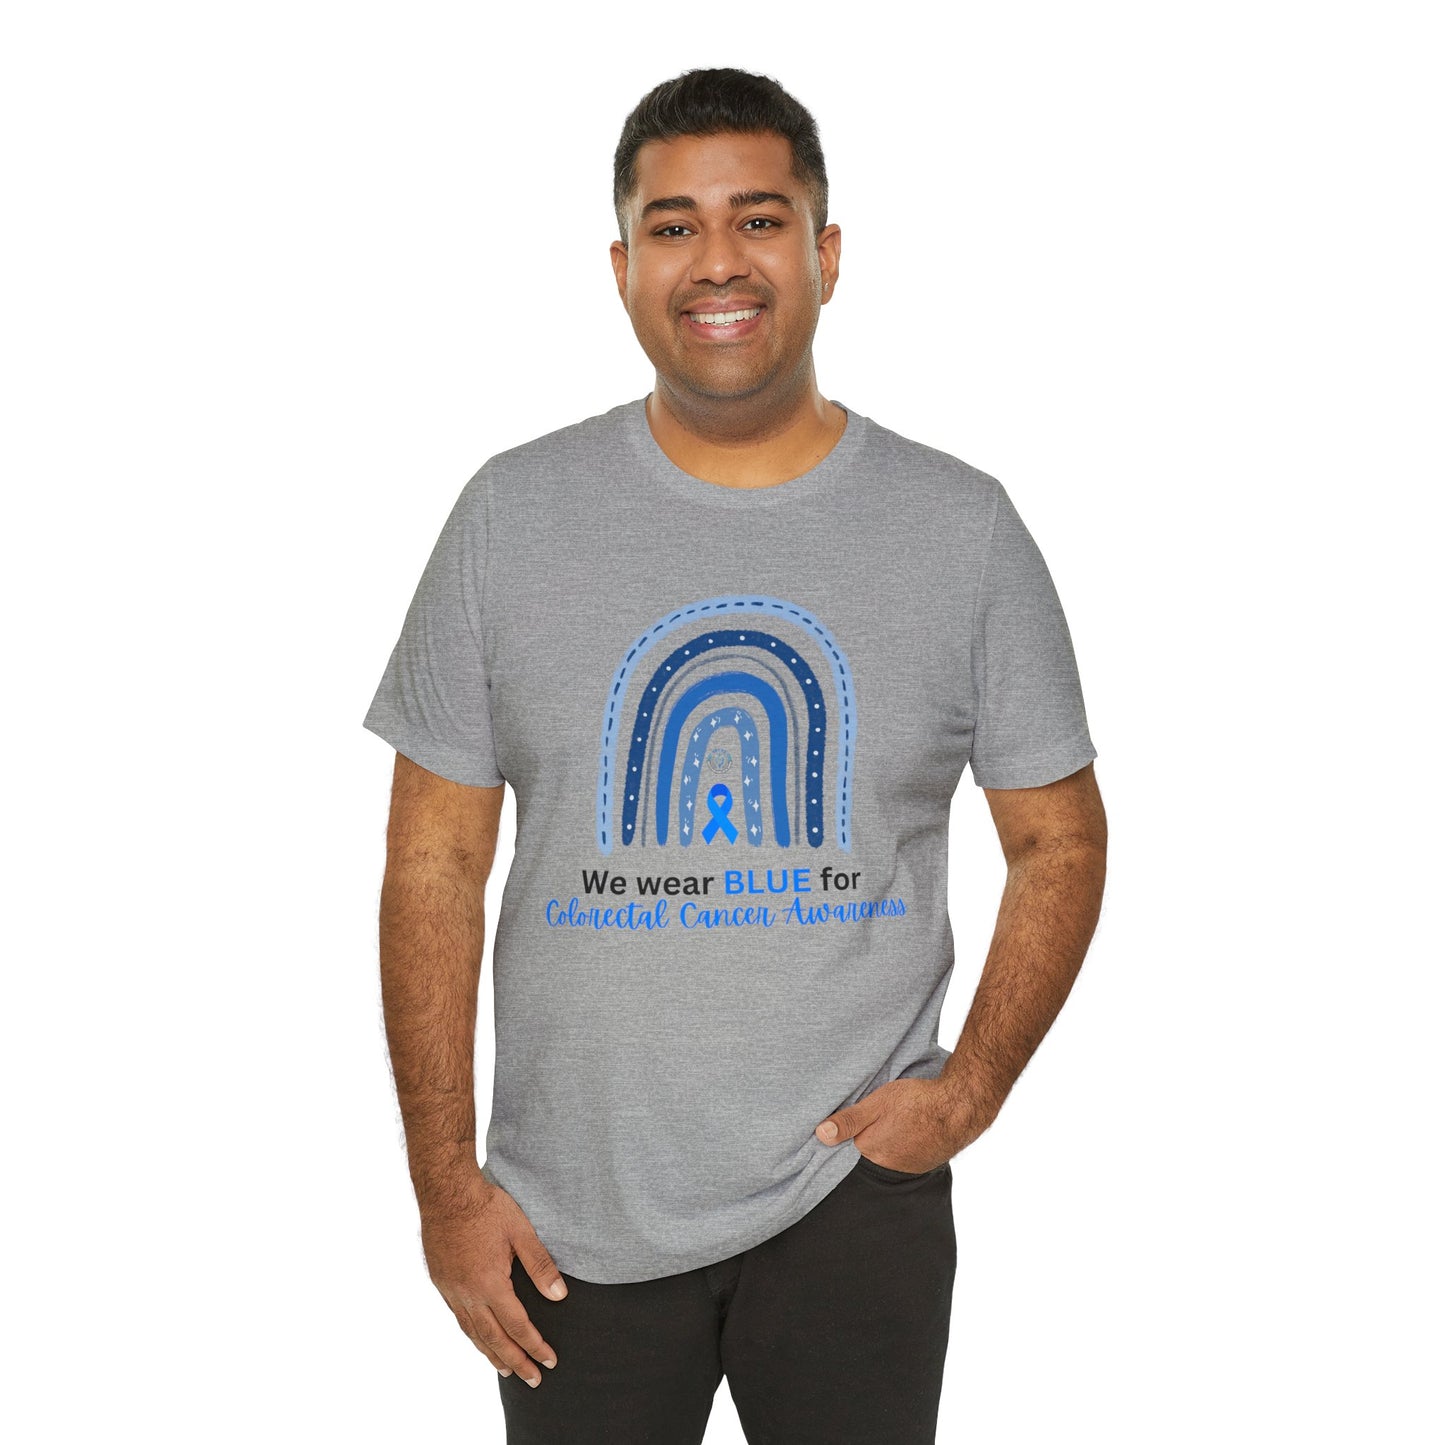 We wear BLUE for Colon Cancer Awareness Month Shirt